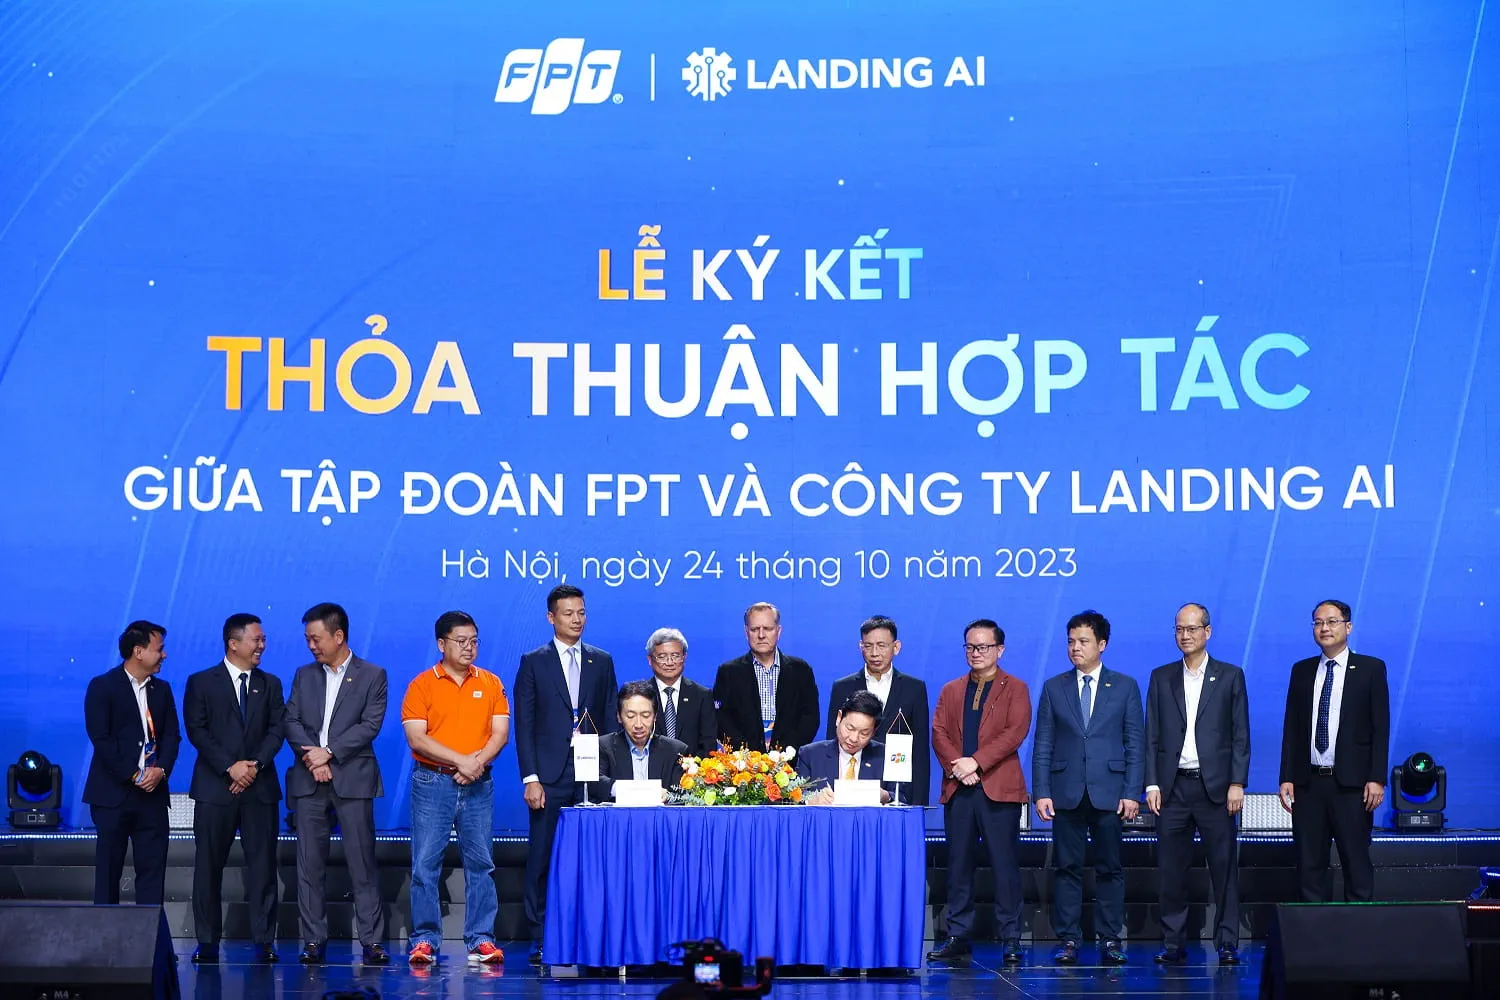 FPT - Landing AI partnership announcement ceremony took place at FPT Techday 2023 in Hanoi